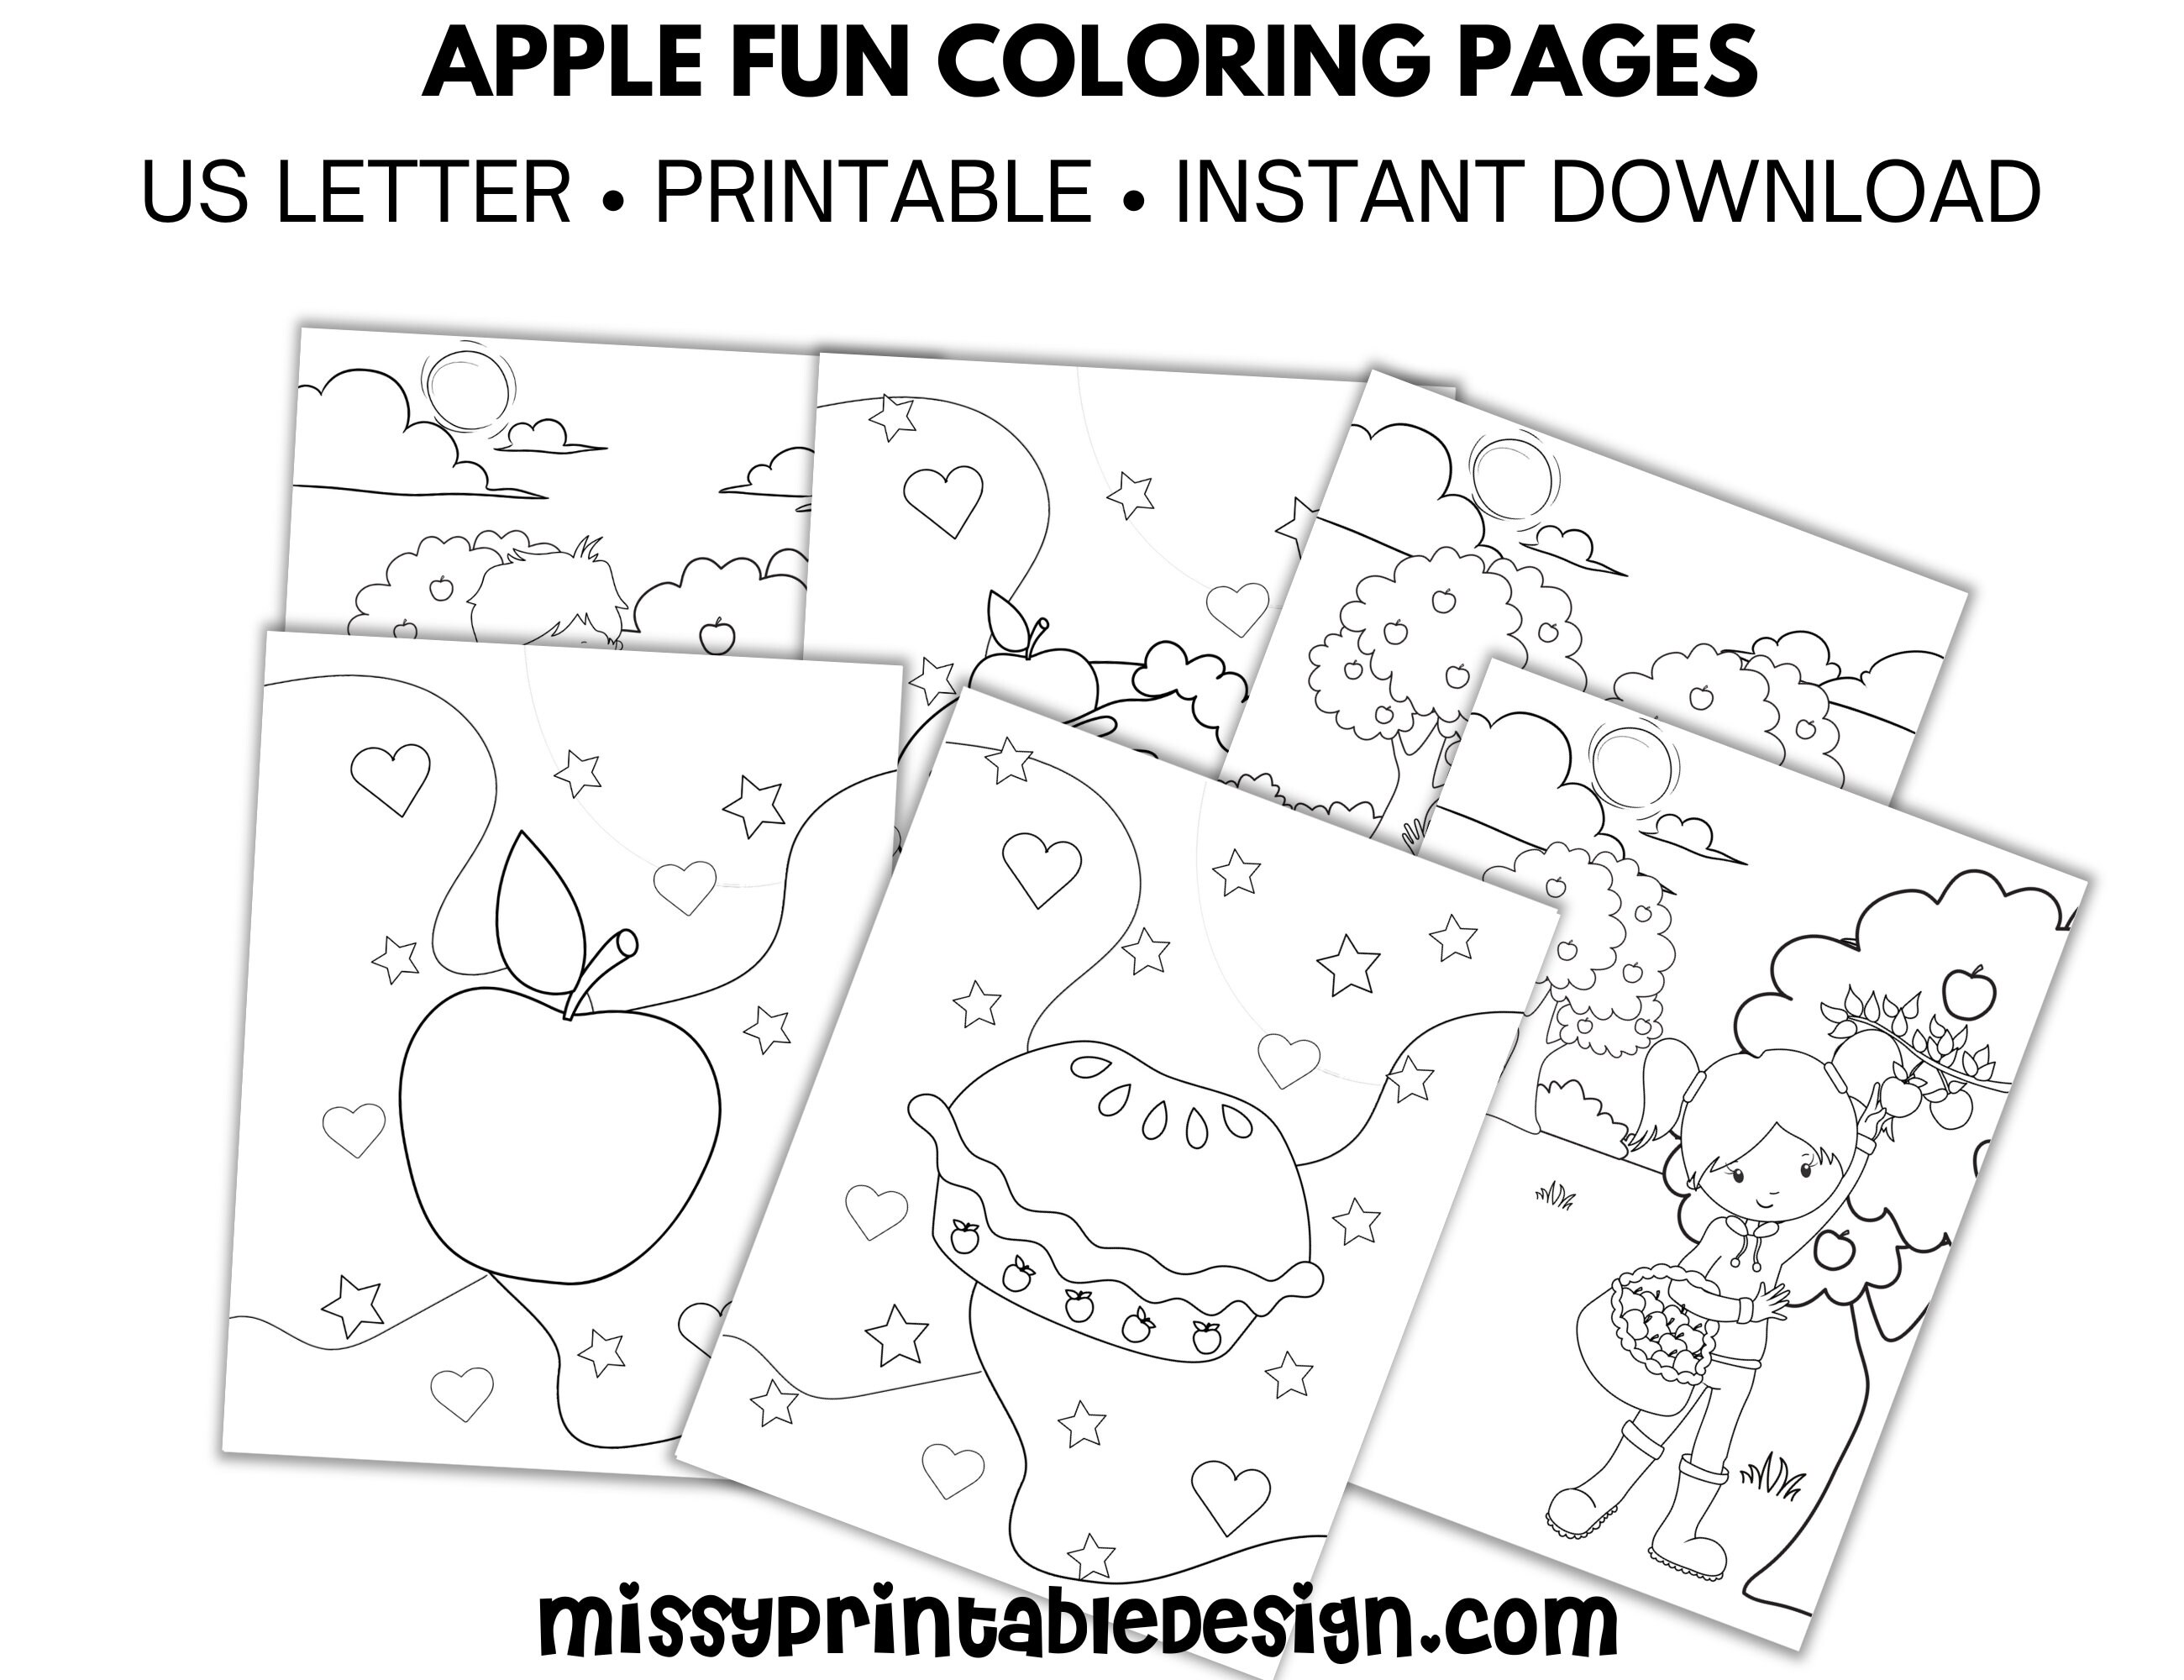 Apple fun coloring pages for kids printable apple coloring pages apple activity kids coloring sheets instant download